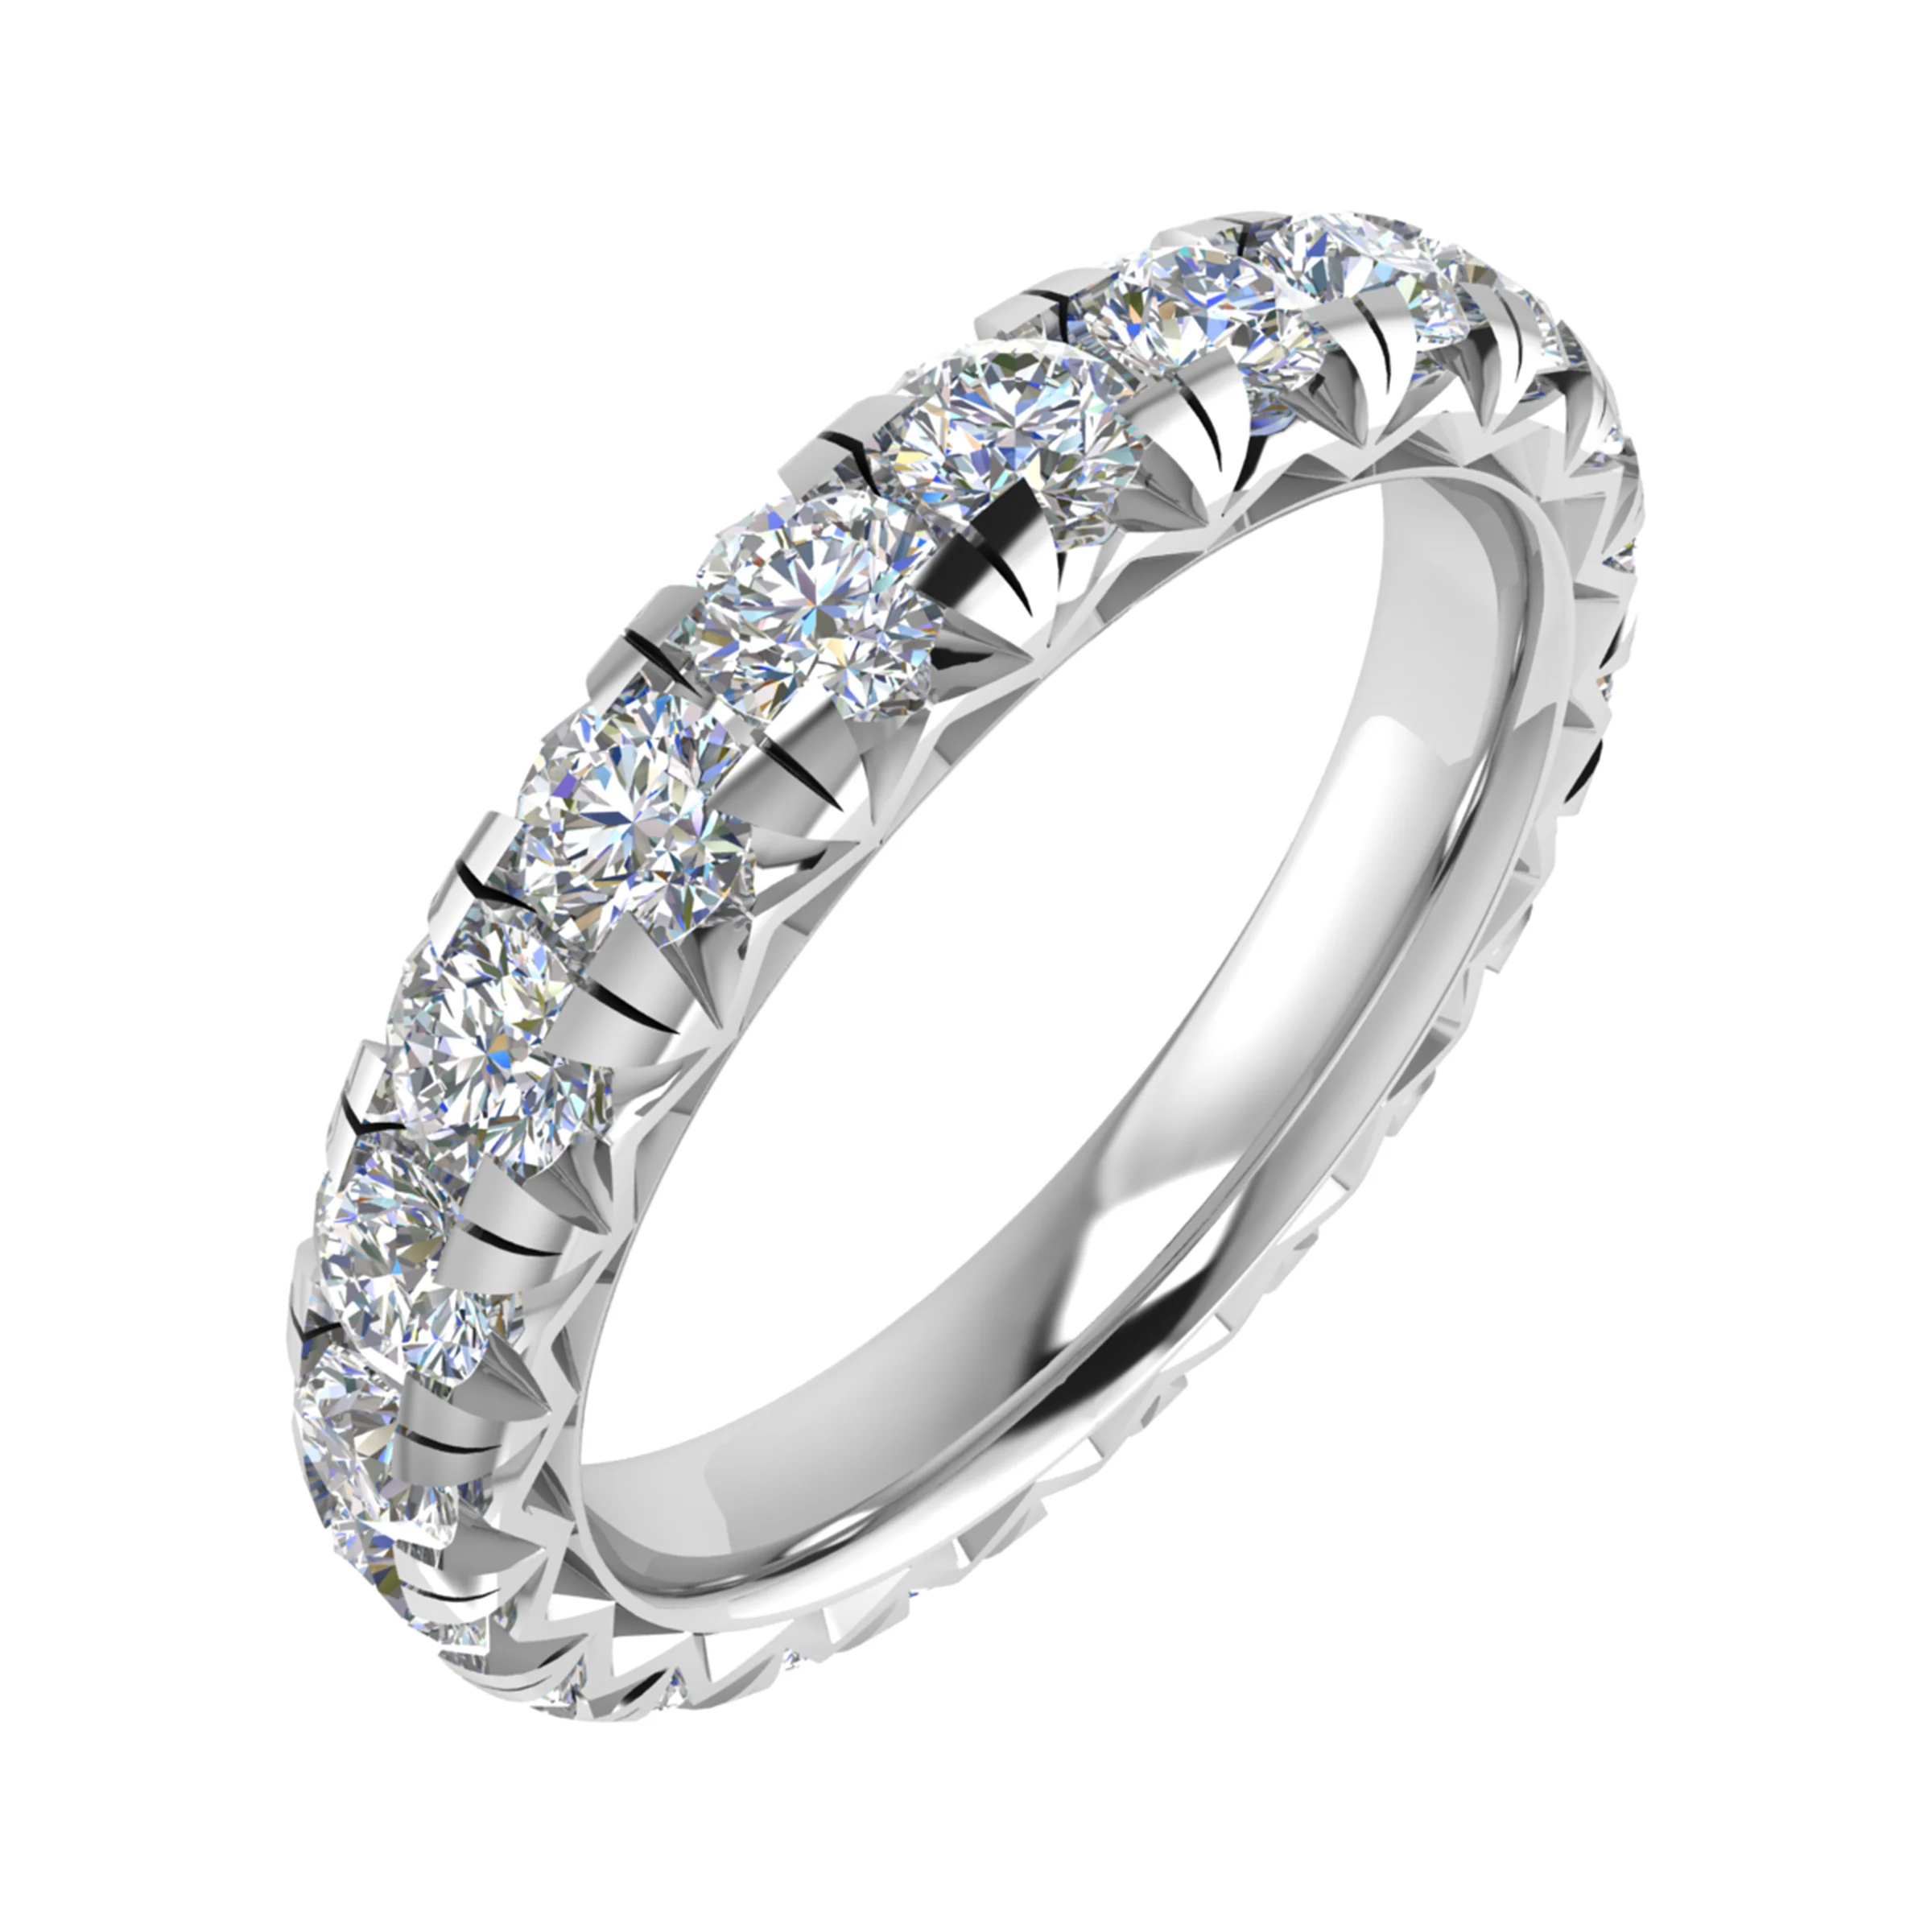 0.50 - 2.00 Carat Round Diamond Full Eternity Ring with Micro Claw Set